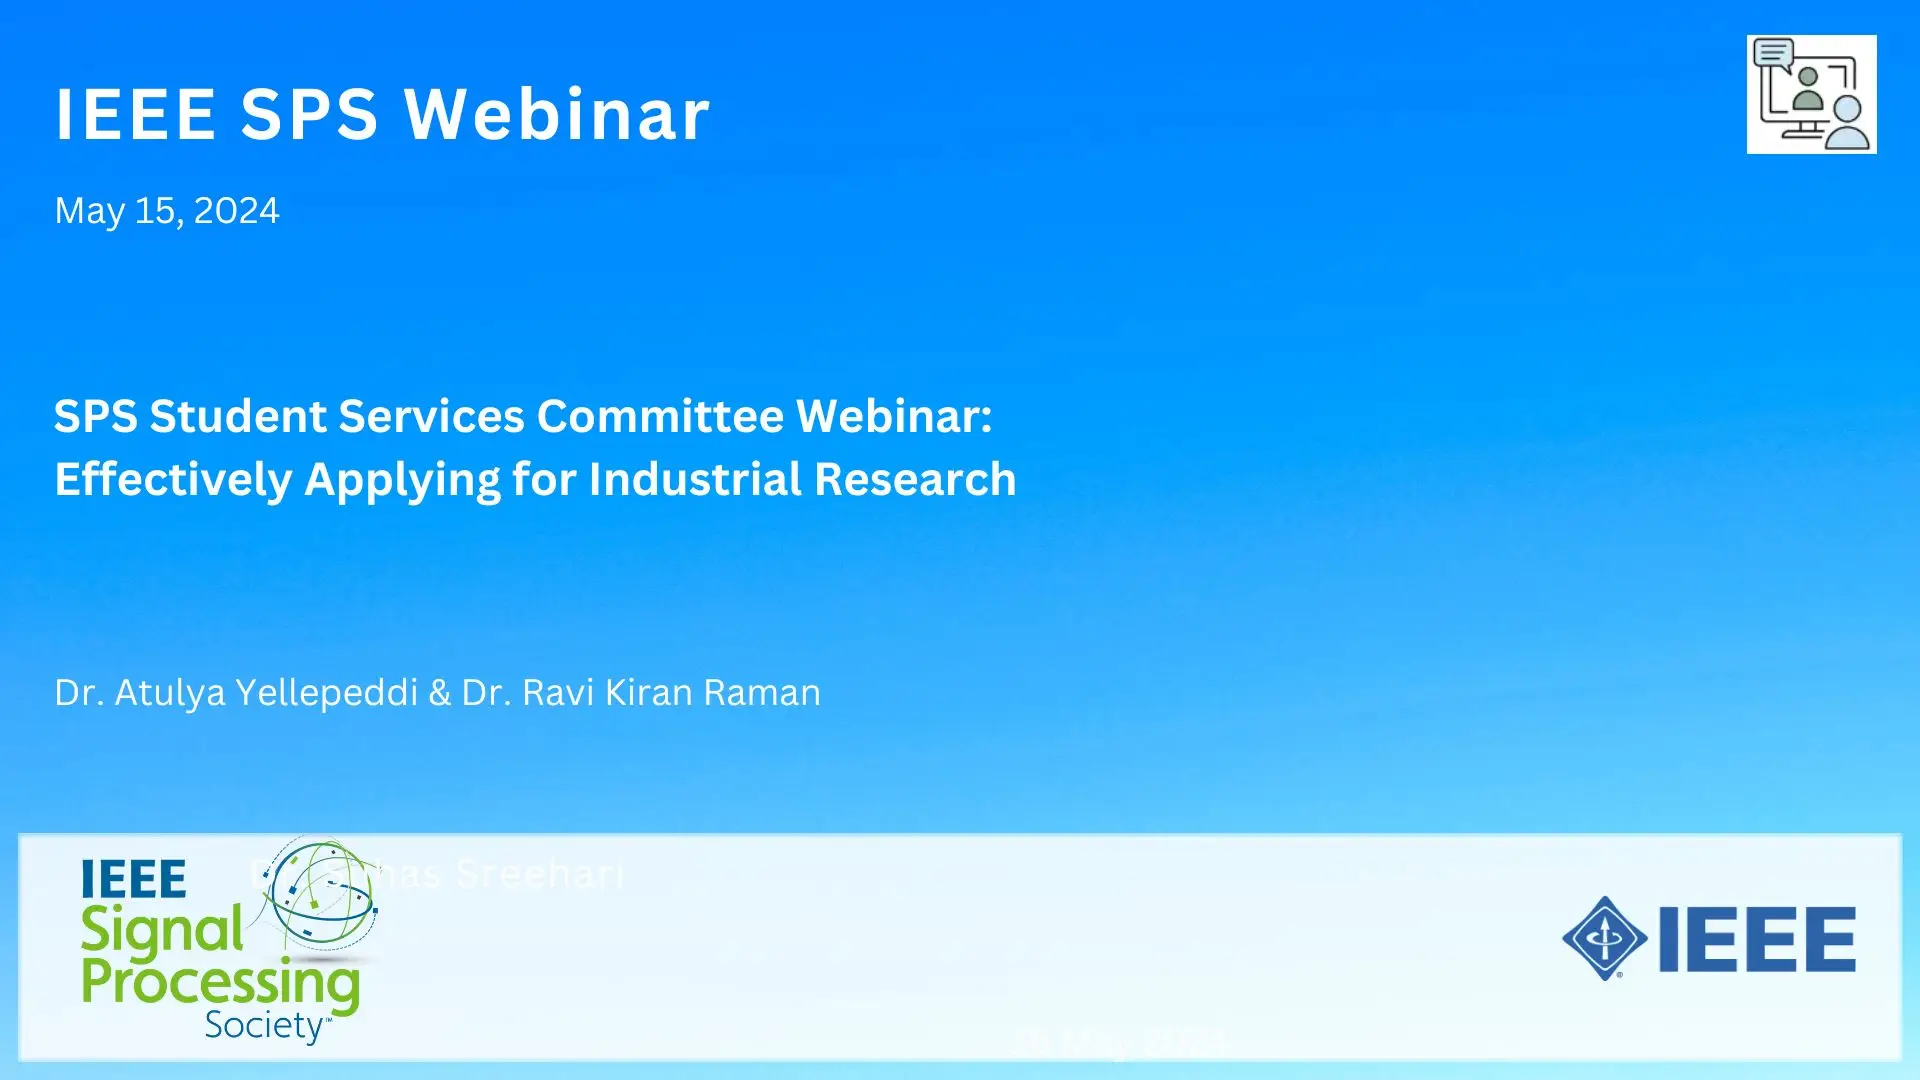 SPS Student Services Committee Webinar: Effectively Applying for Industrial Research